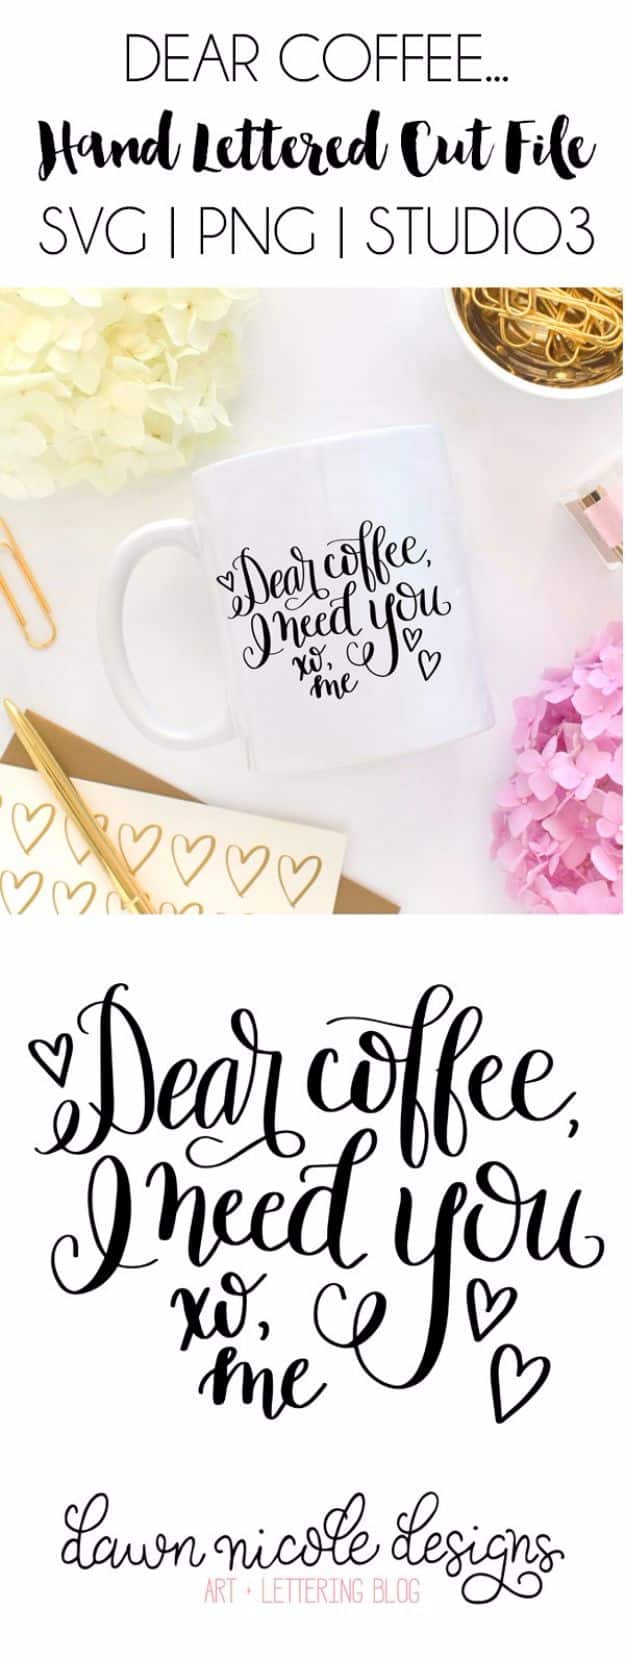 DIY Coffee Mugs - Dear Coffee Hand Lettered Free SVG Cut File - Easy Coffee Mug Ideas for Homemade Gifts and Crafts - Decorate Your Coffee Cups and Tumblers With These Cool Art Ideas - Glitter, Paint, Sharpie Craft, Nail Polish Water Marble and Teen Projects #diygifts #easydiy